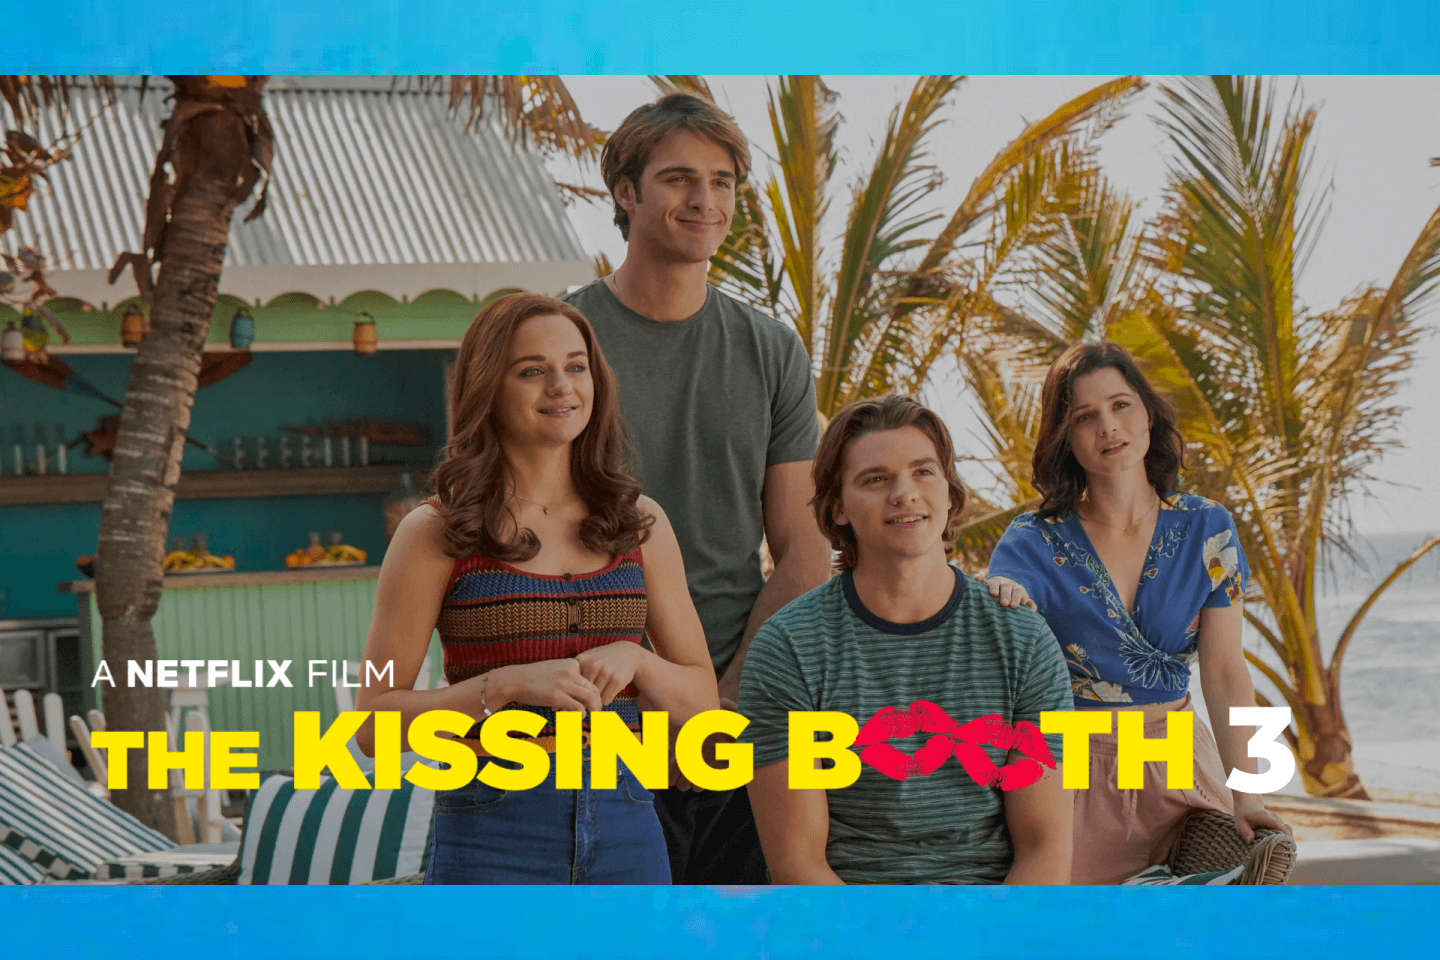 The kissing booth 3 (2021)